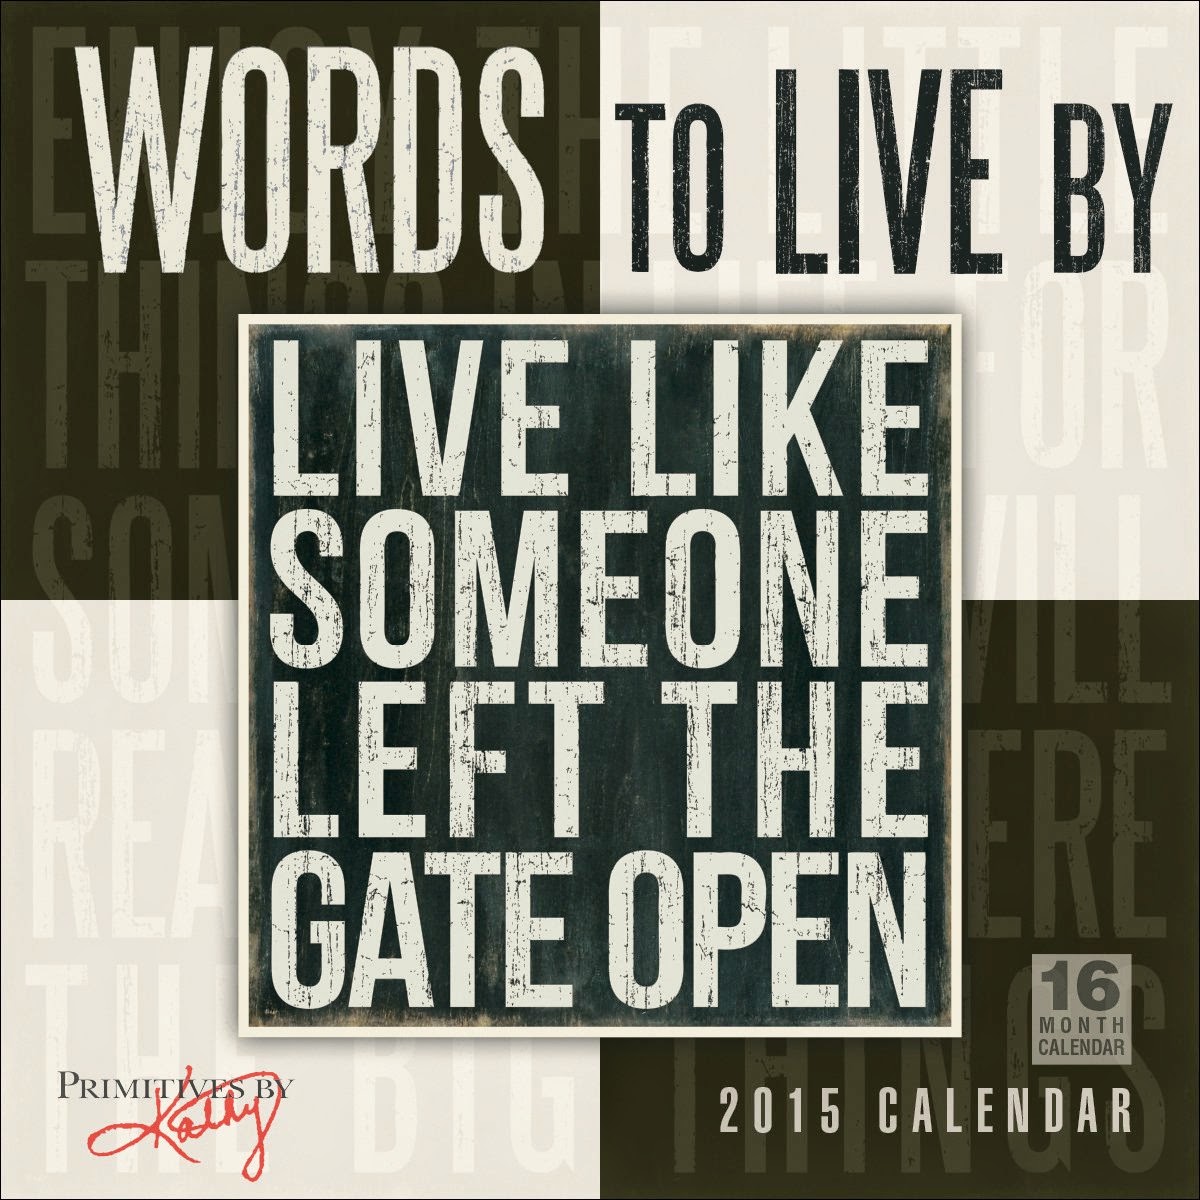  Words to Live by 2015 Wall Calendar